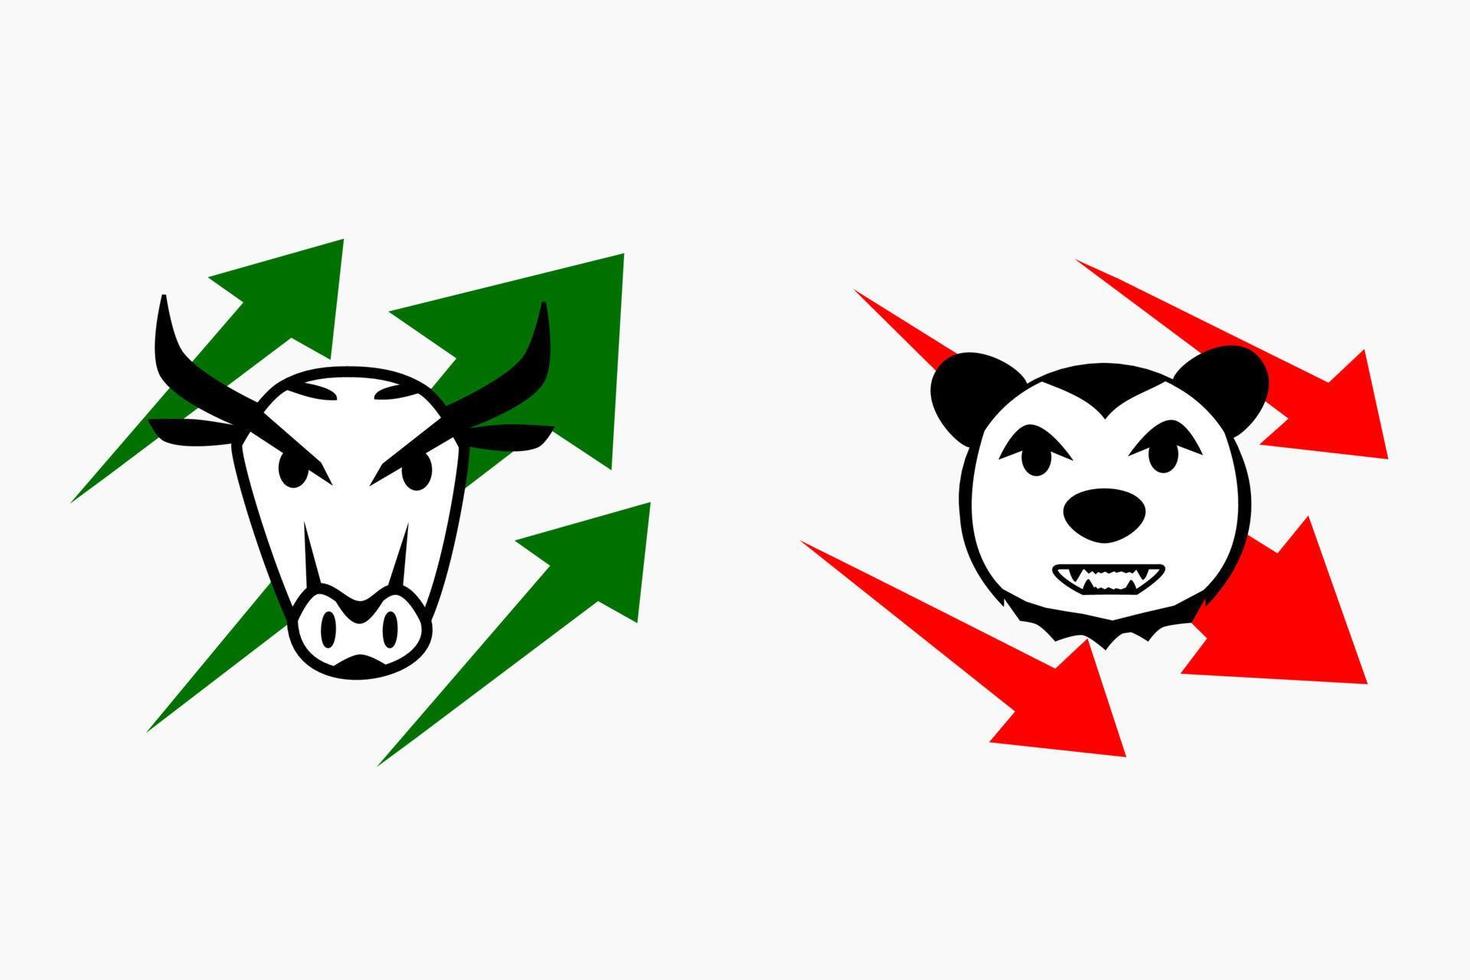 Isolated Bullish and Bearish cartoon concept. stock market concept. financial exchange symbol. up trend and down trend market. vector